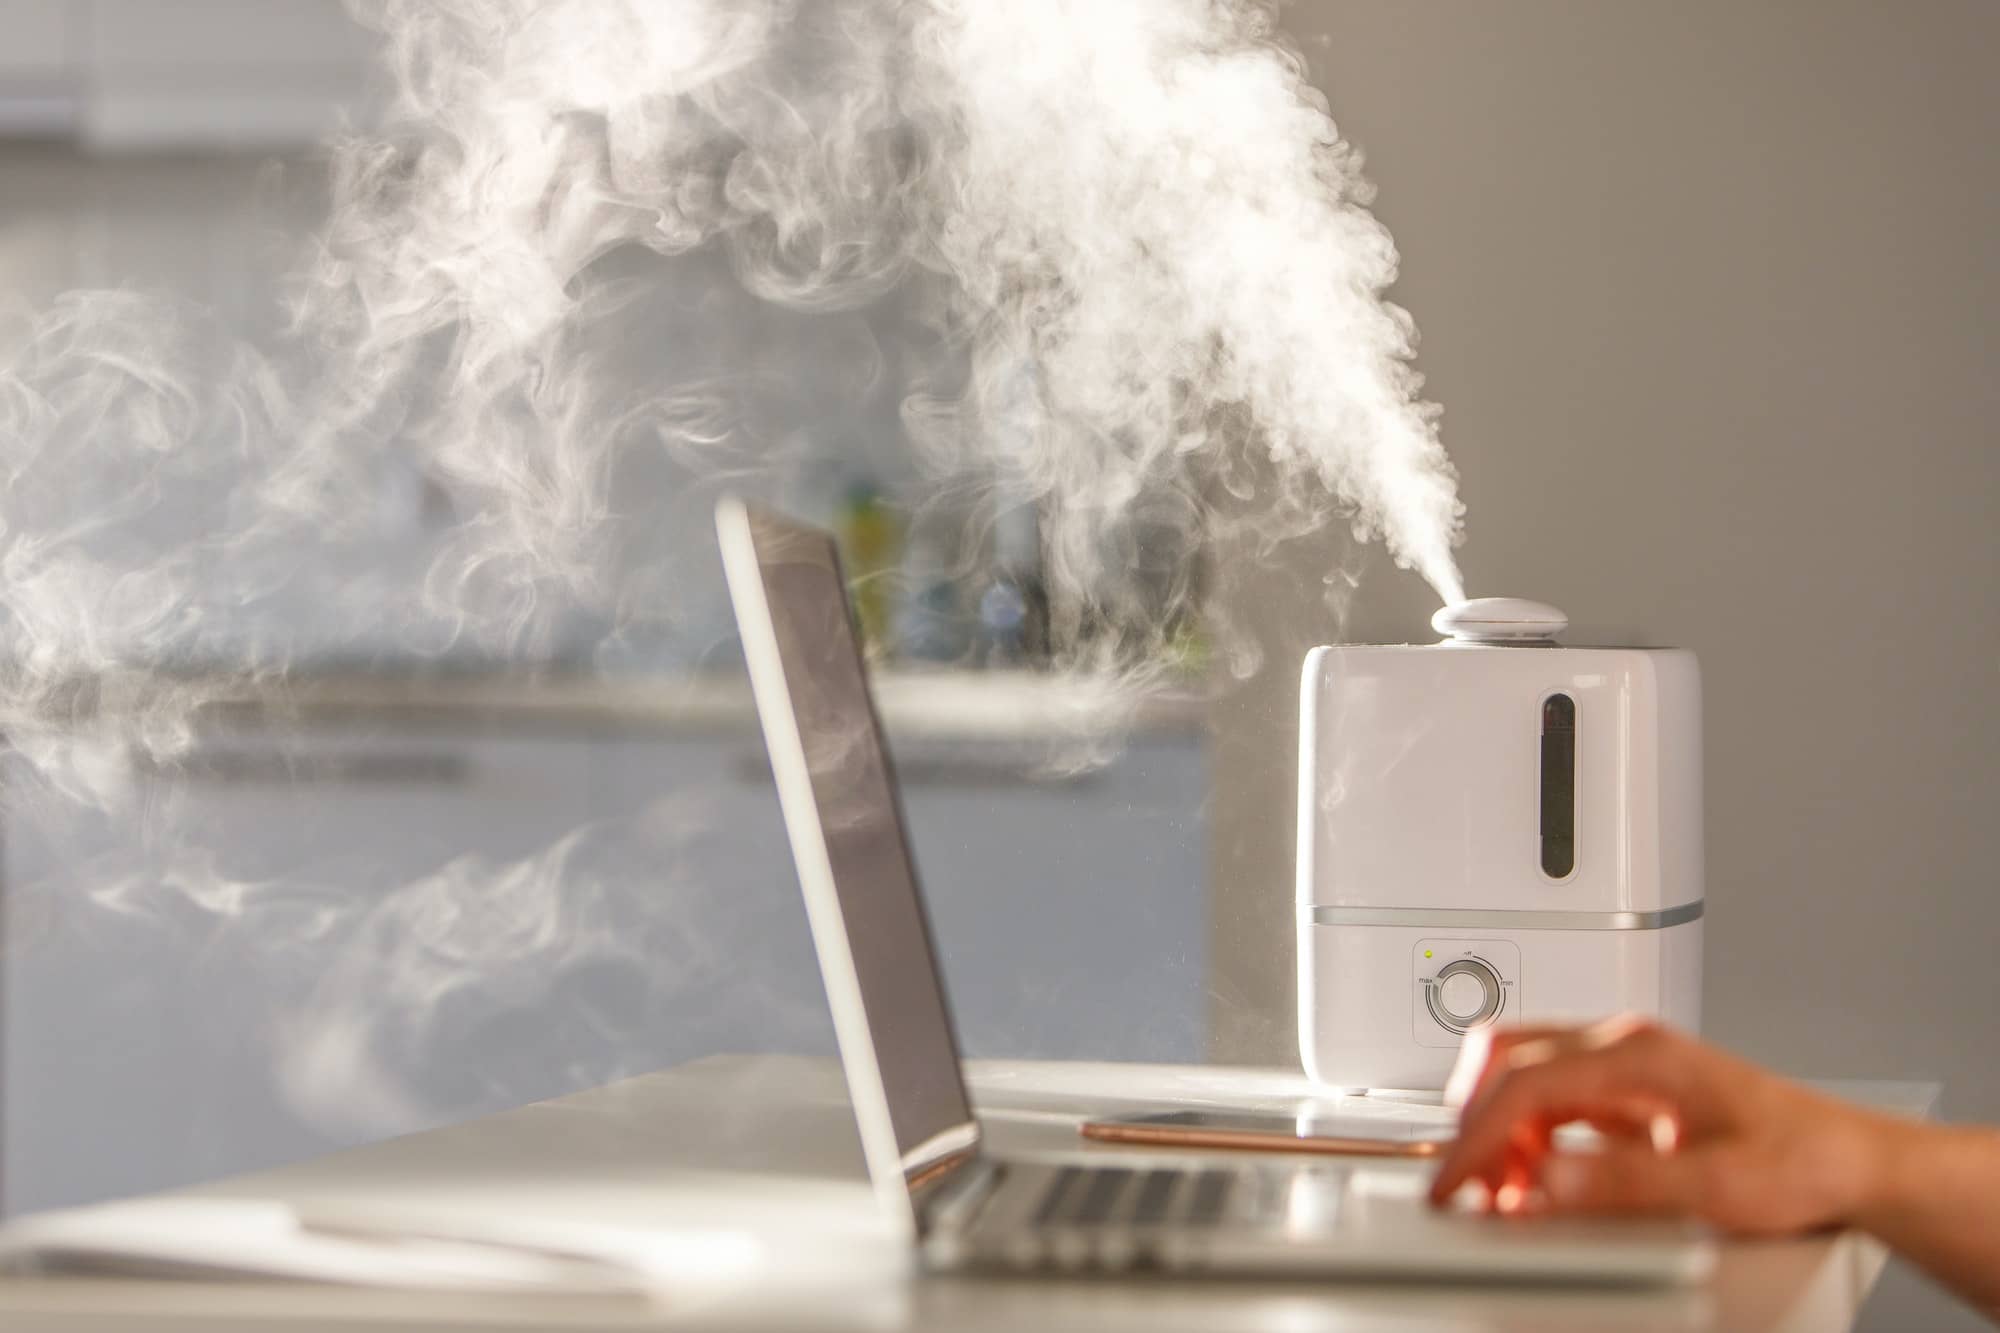 Man working on laptop near the humidifier on the table